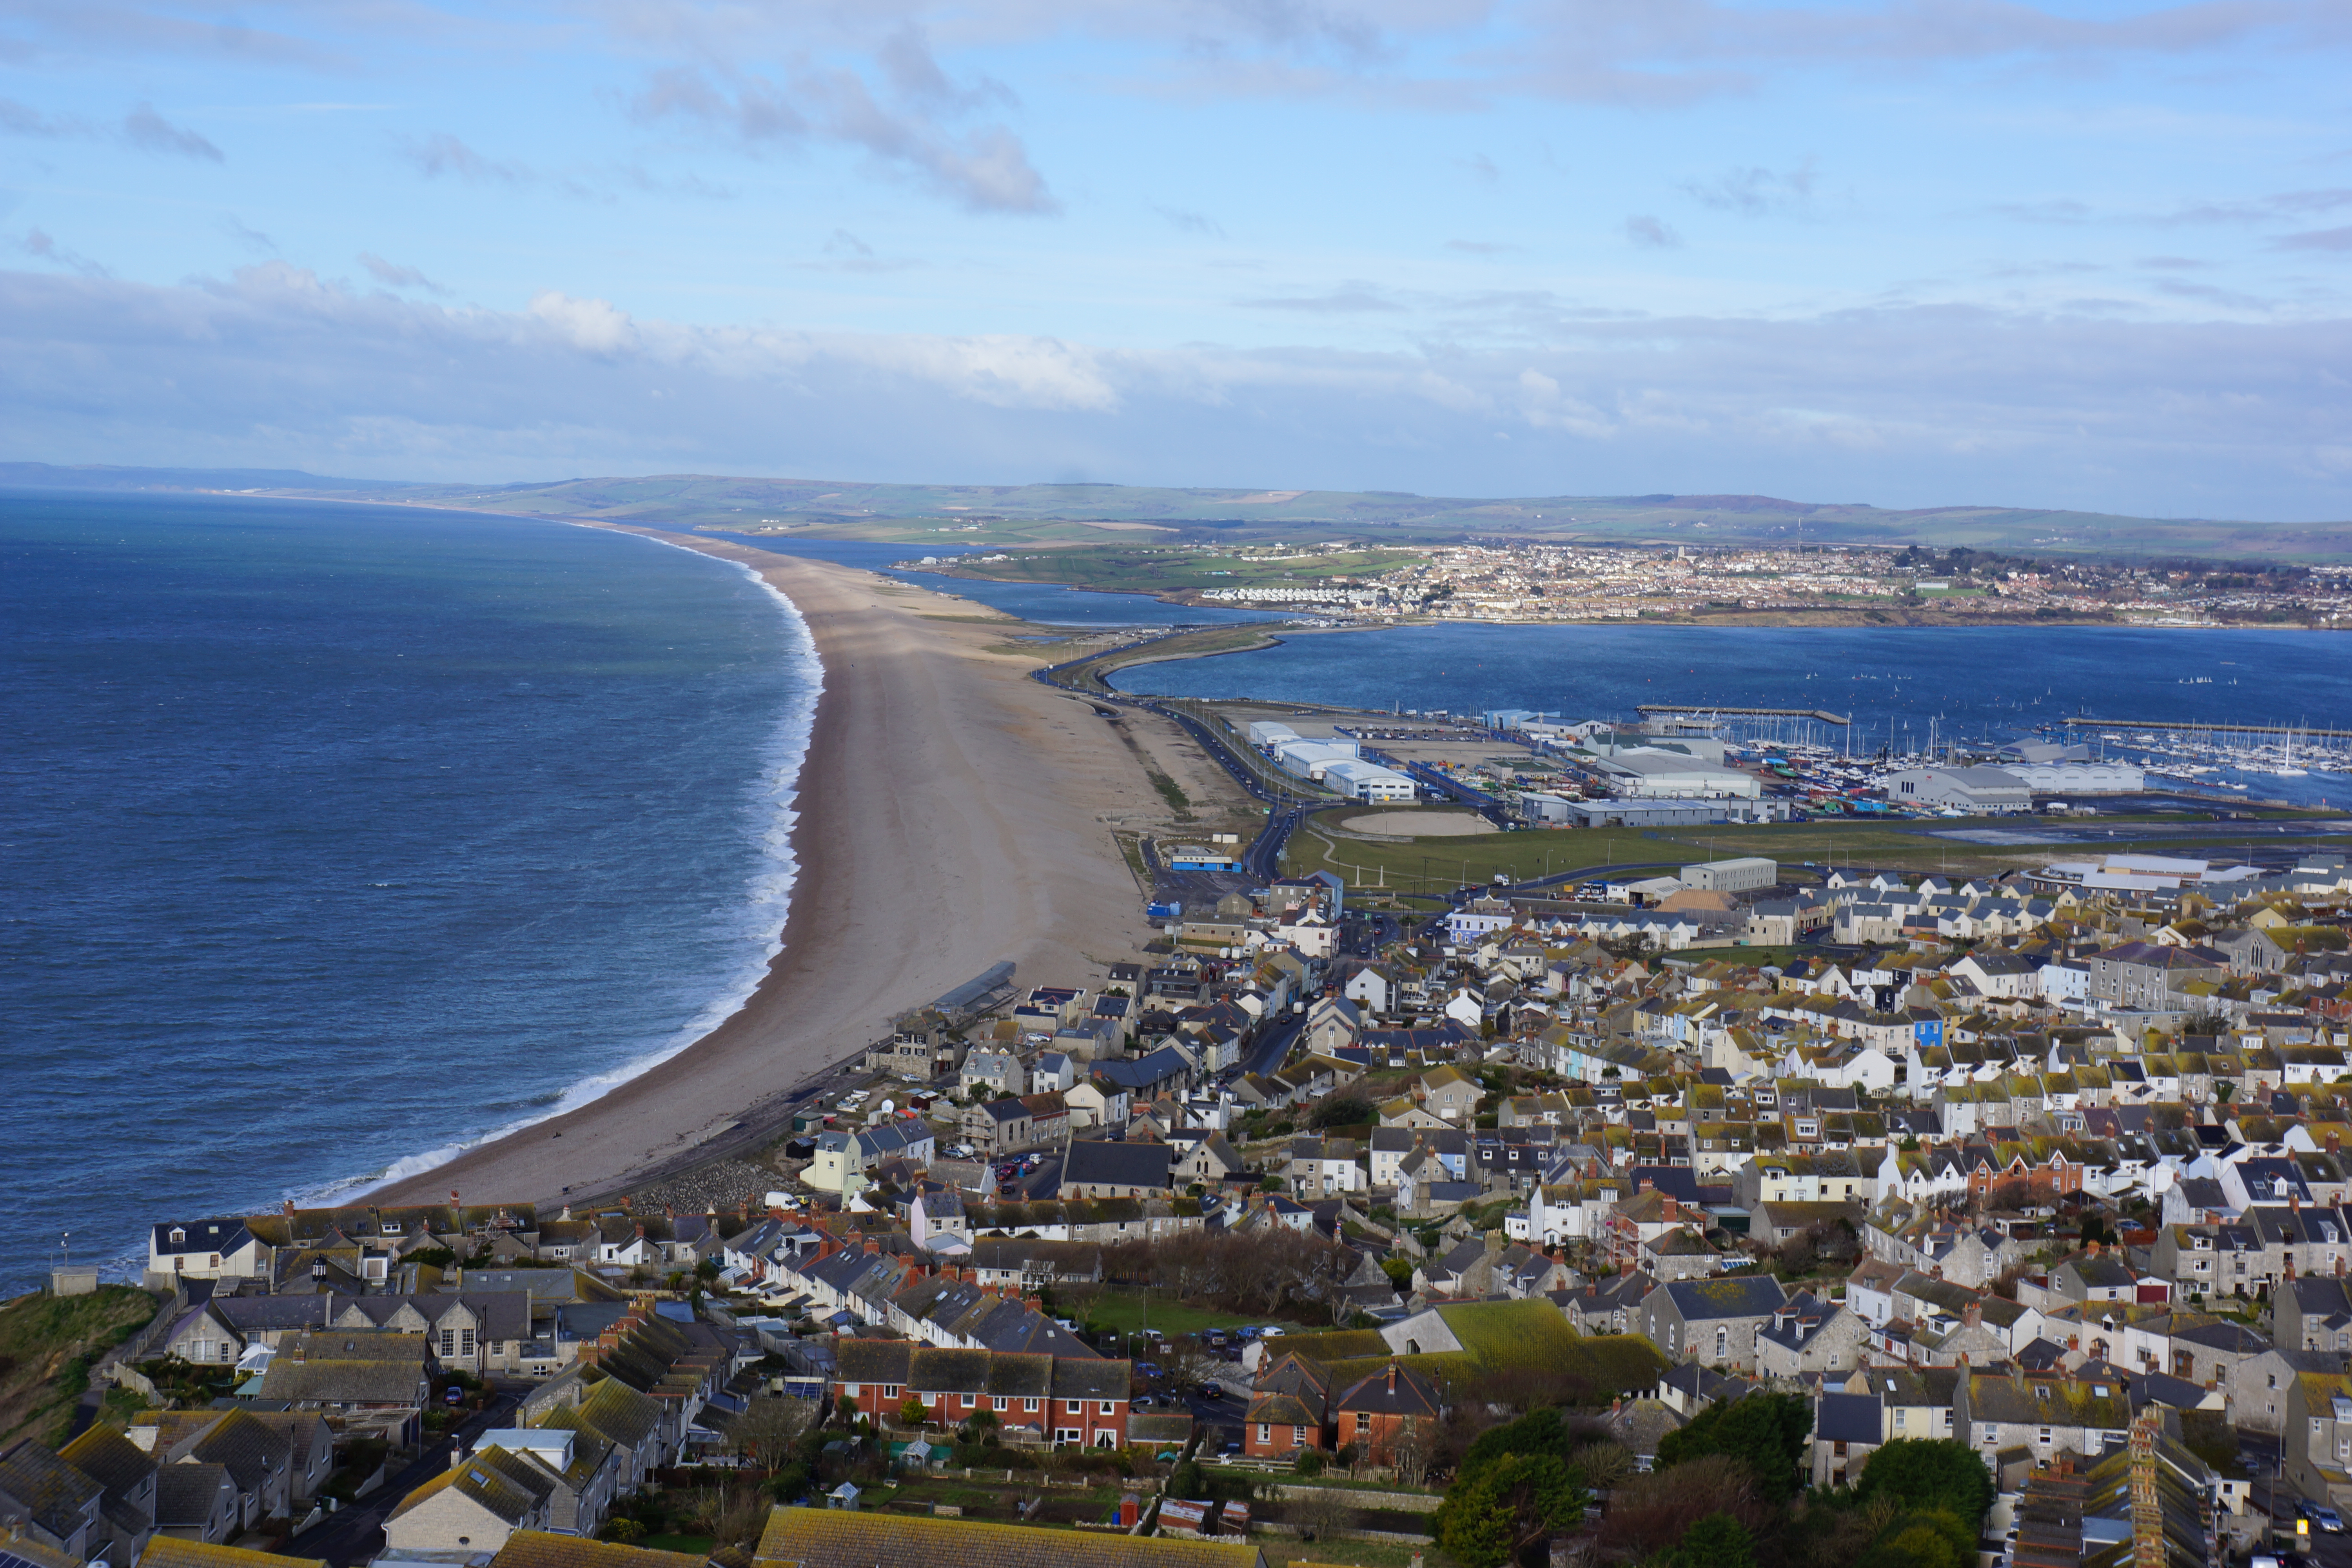  Portland and Chesil Beach for Your Desktop Wallpaper   Anglotopianet